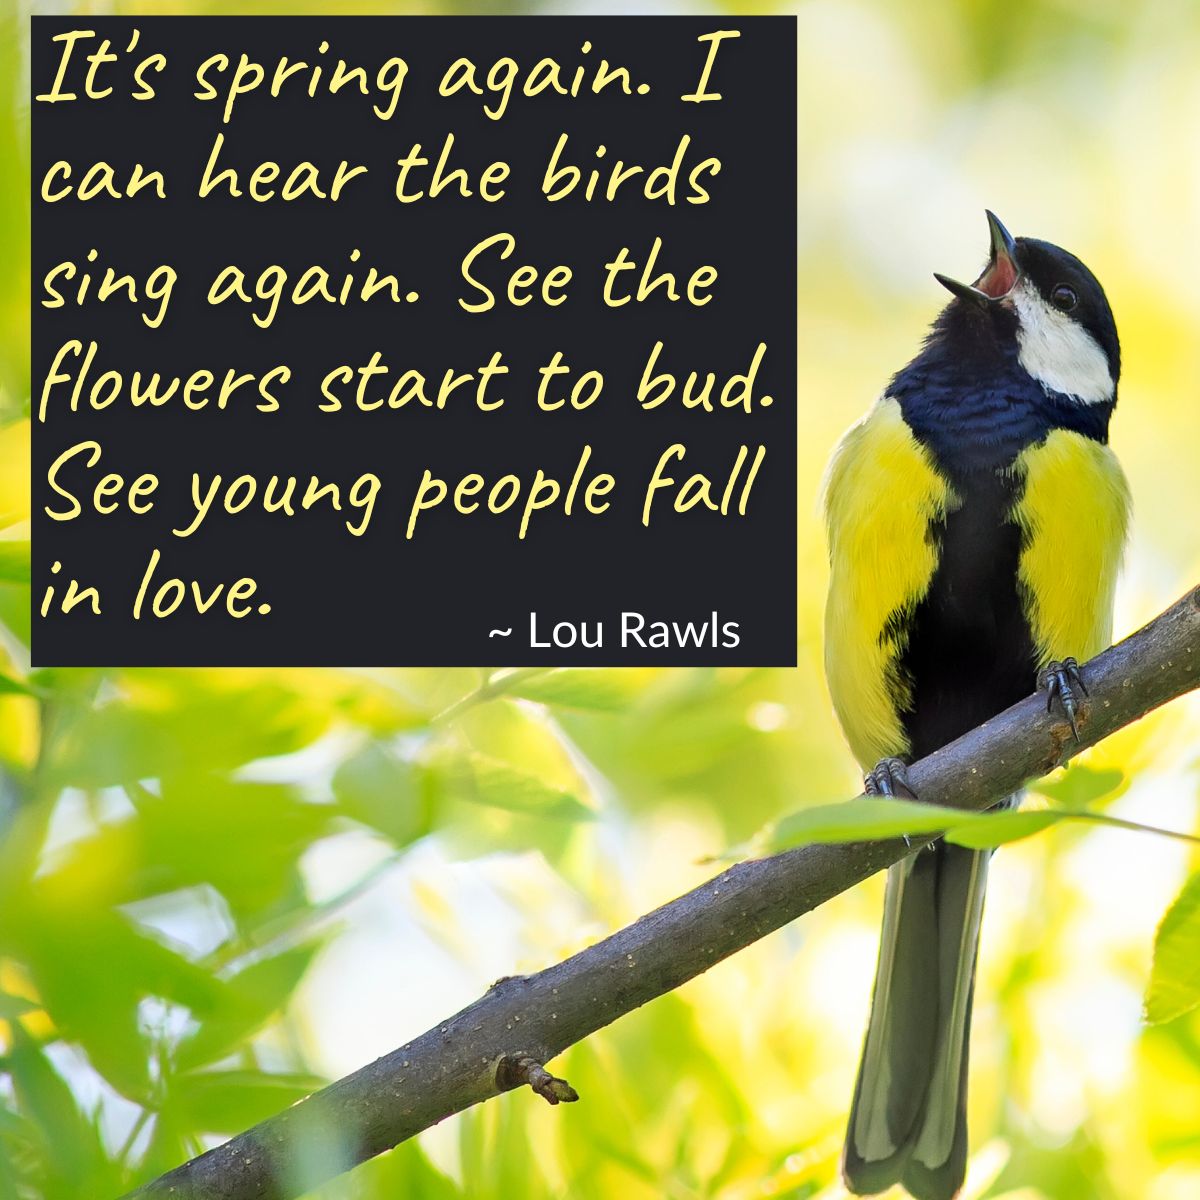 It's spring again. I can hear the birds sing again. See the flowers start to bud. See young people fall in love. ~ Lou Rawls  